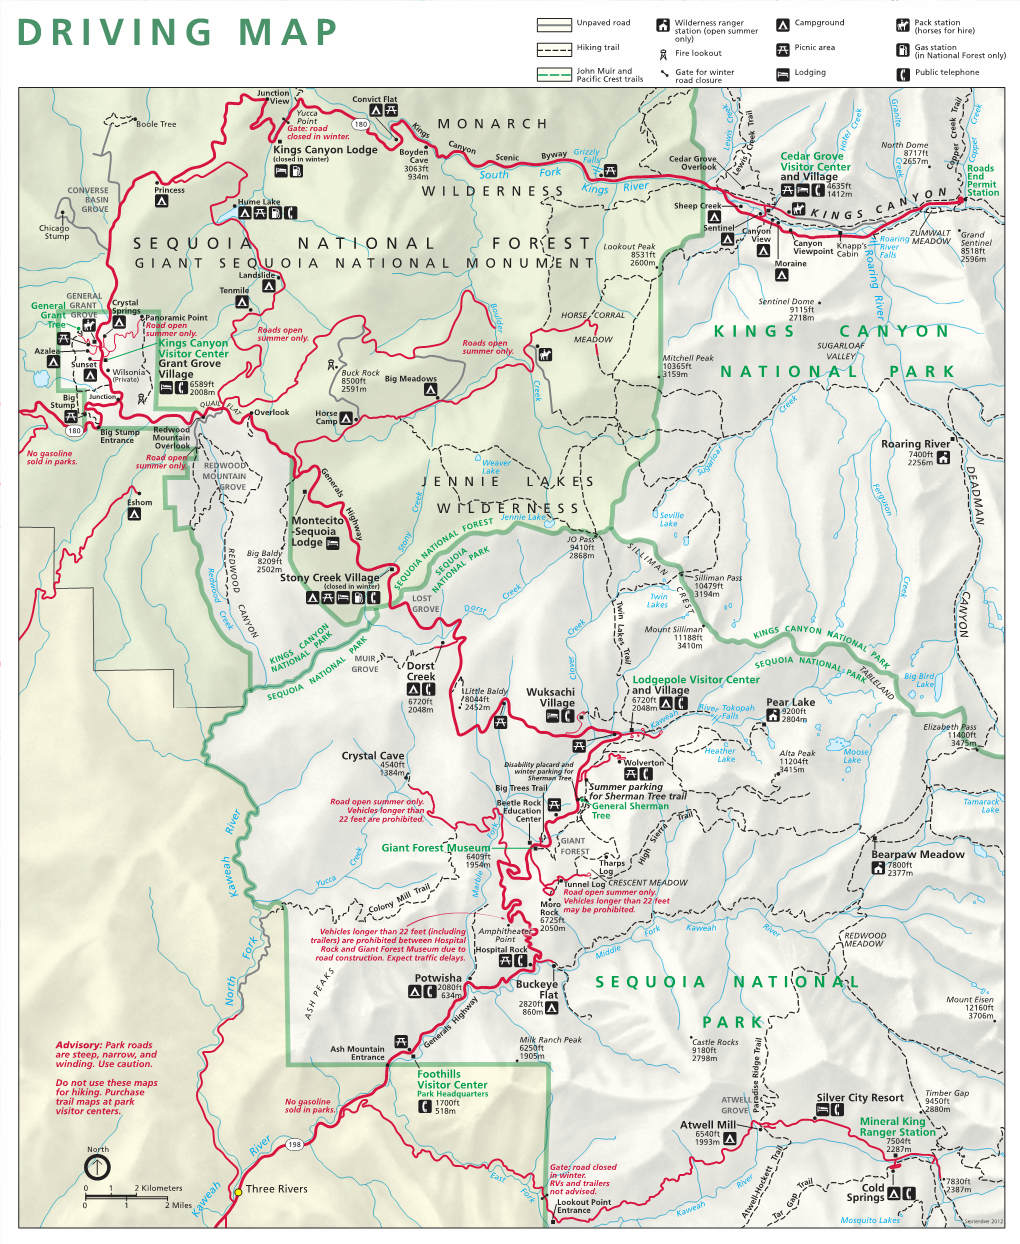 DRIVING MAP Hiking Trail Picnic Area Gas Station Fire Lookout (In National Forest Only)